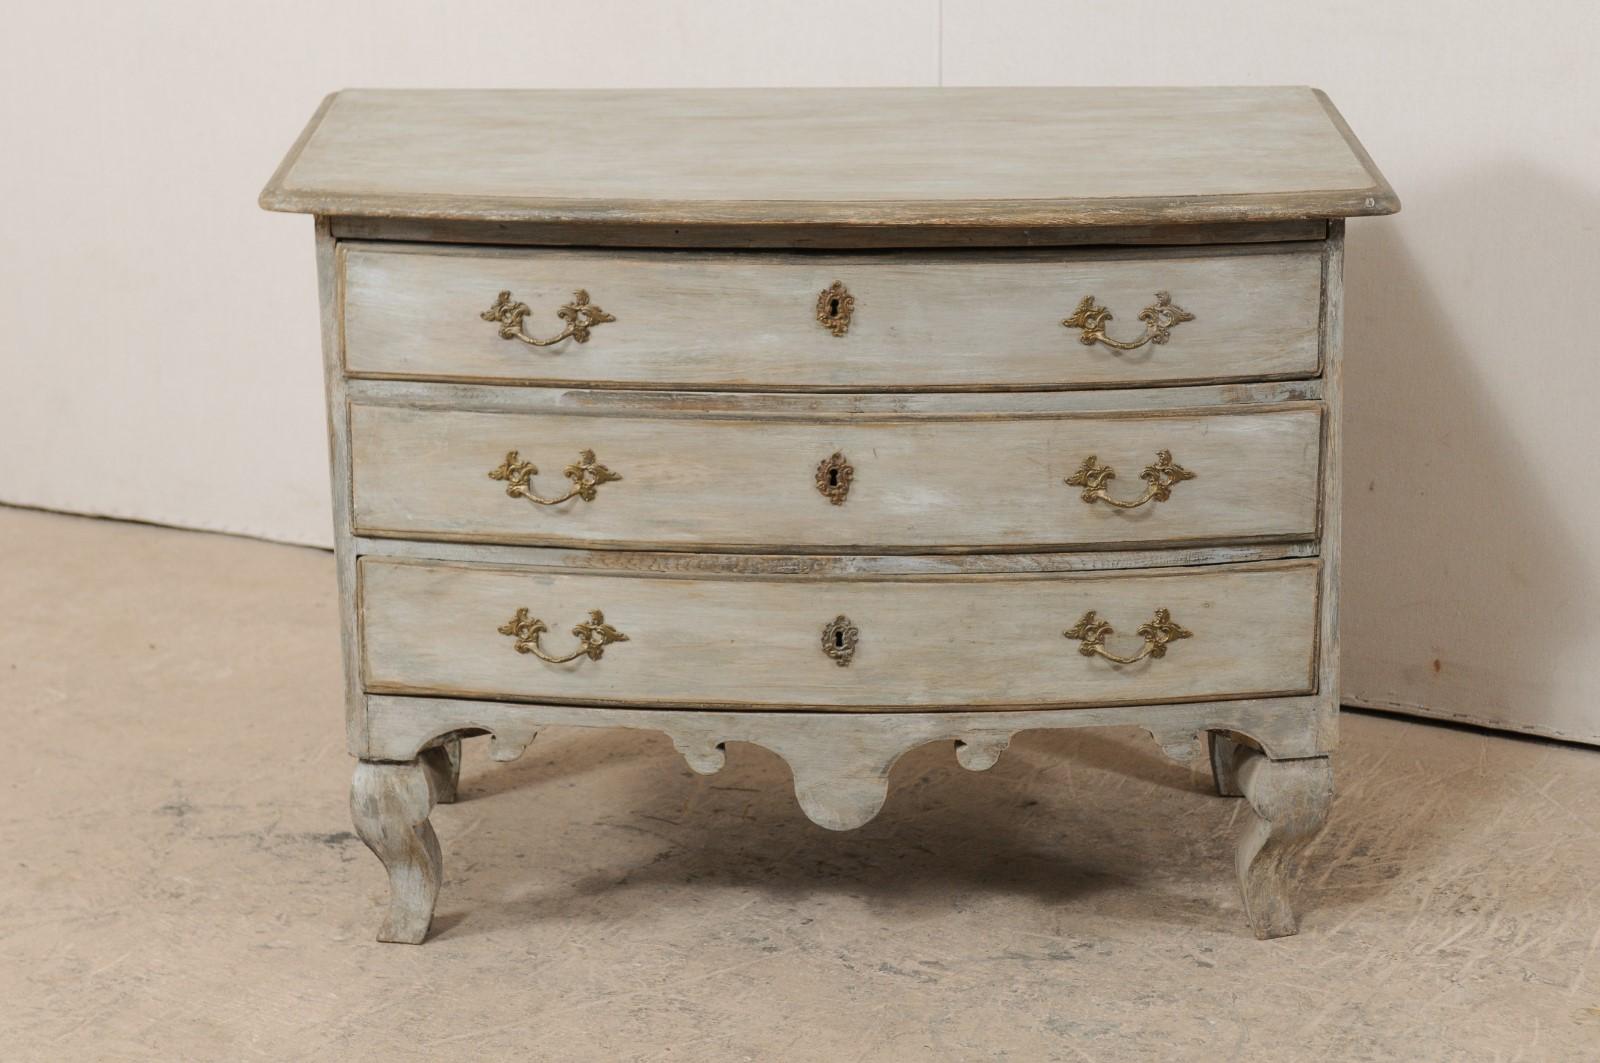 A Swedish period Rococo bow-front painted wood chest of drawers from the mid 18th century. This antique period Rococo chest from Sweden features a bow front top and body, elaborately carved front and side skirts, and is presented upon four robustly